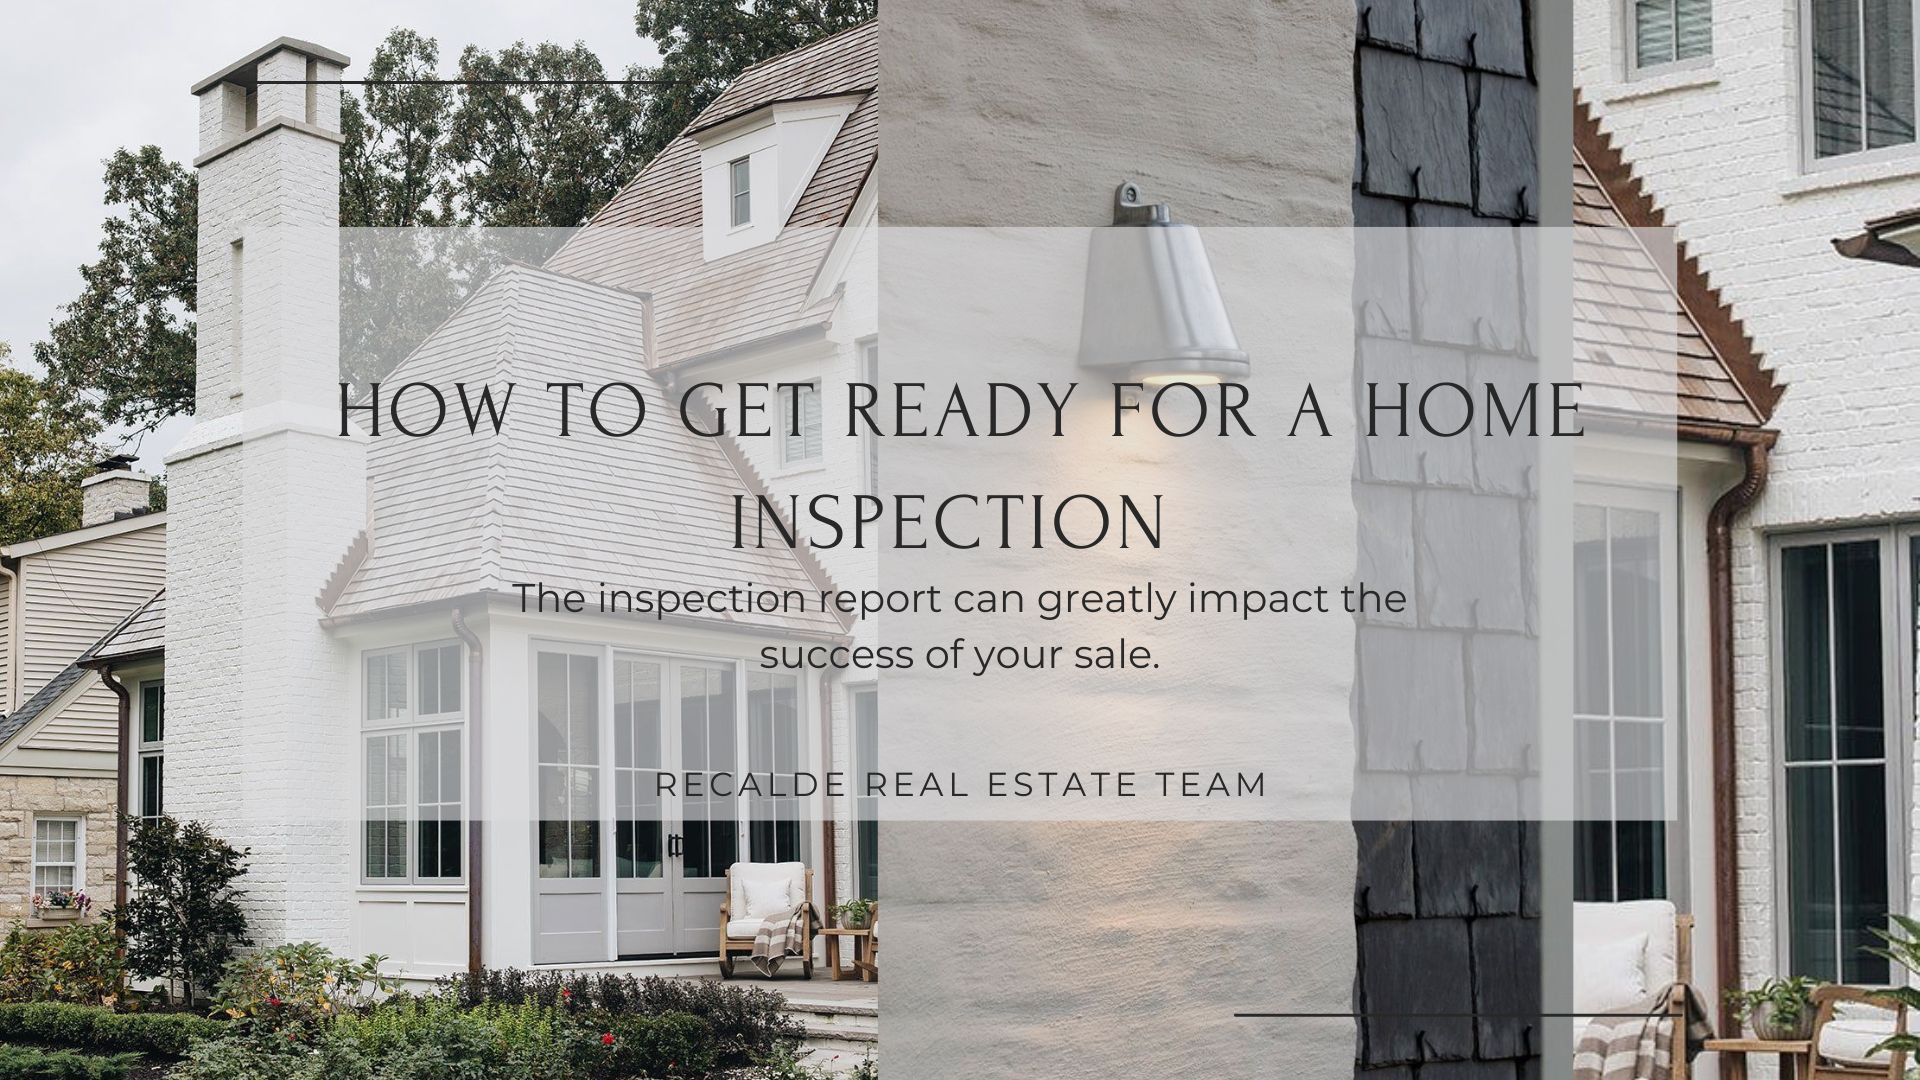 How to get ready for a home inspection for seller